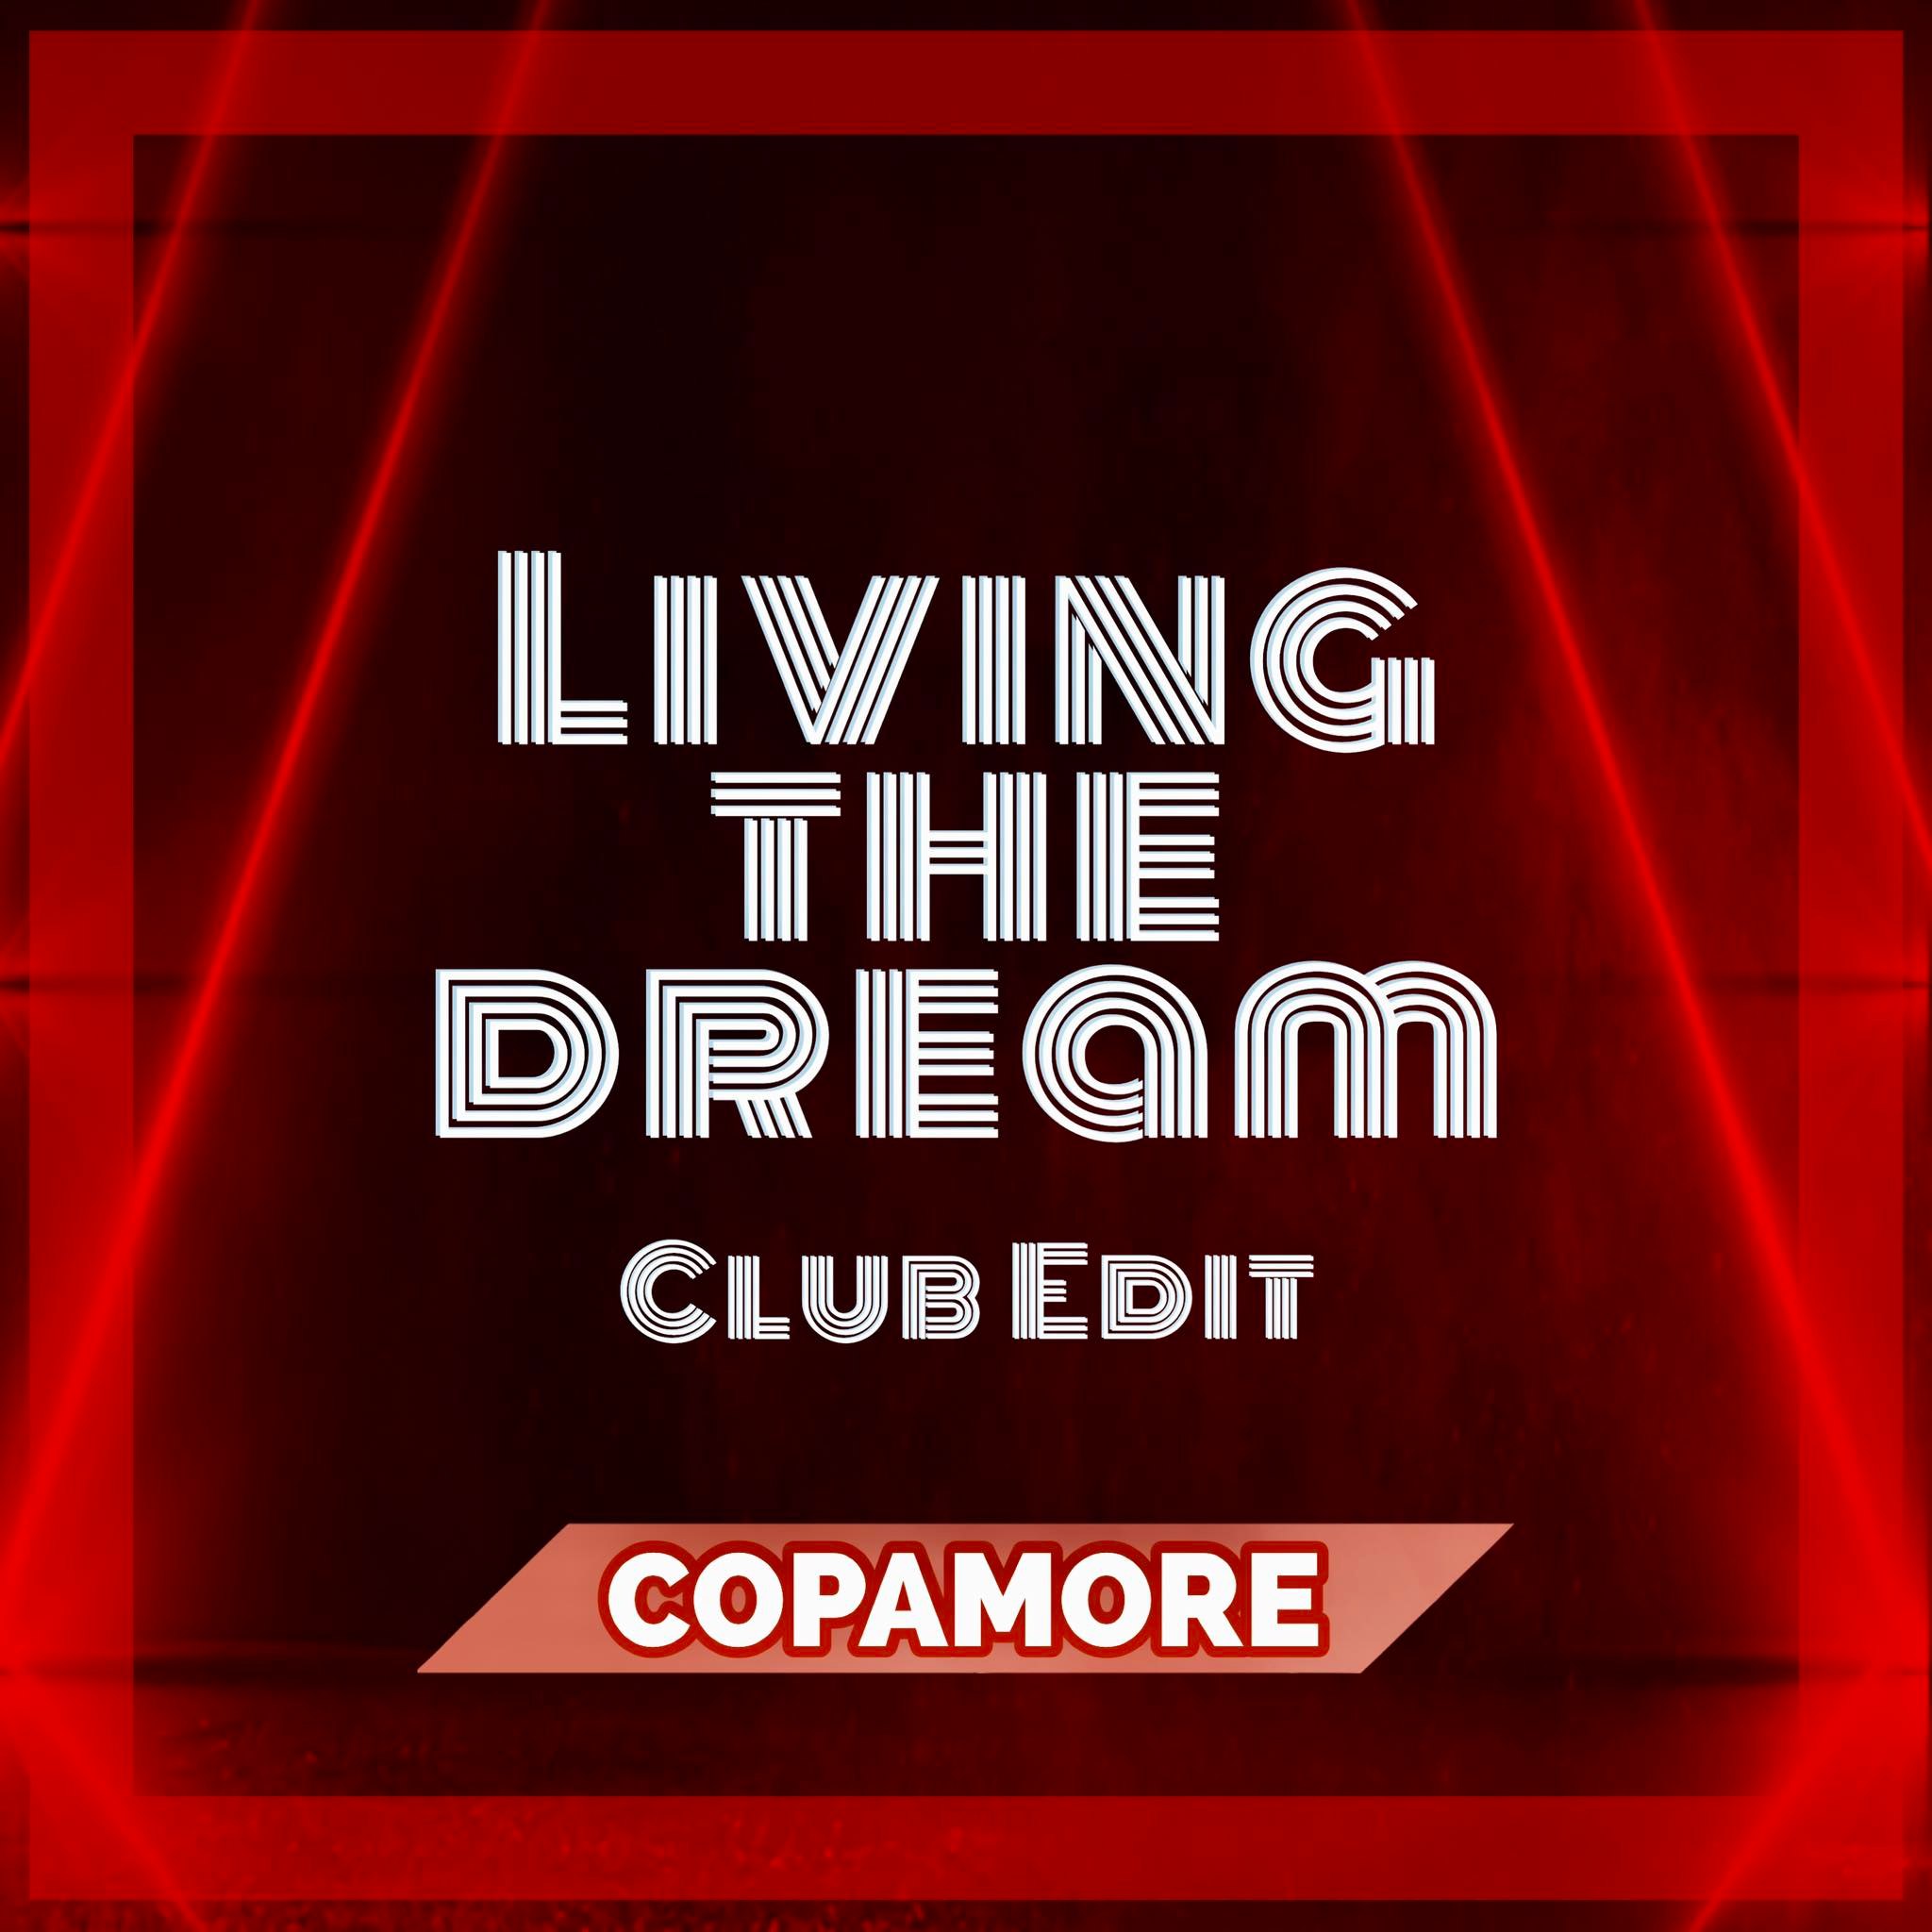 Copamore – Music Producer Diary Note 2: “Living The Dream”